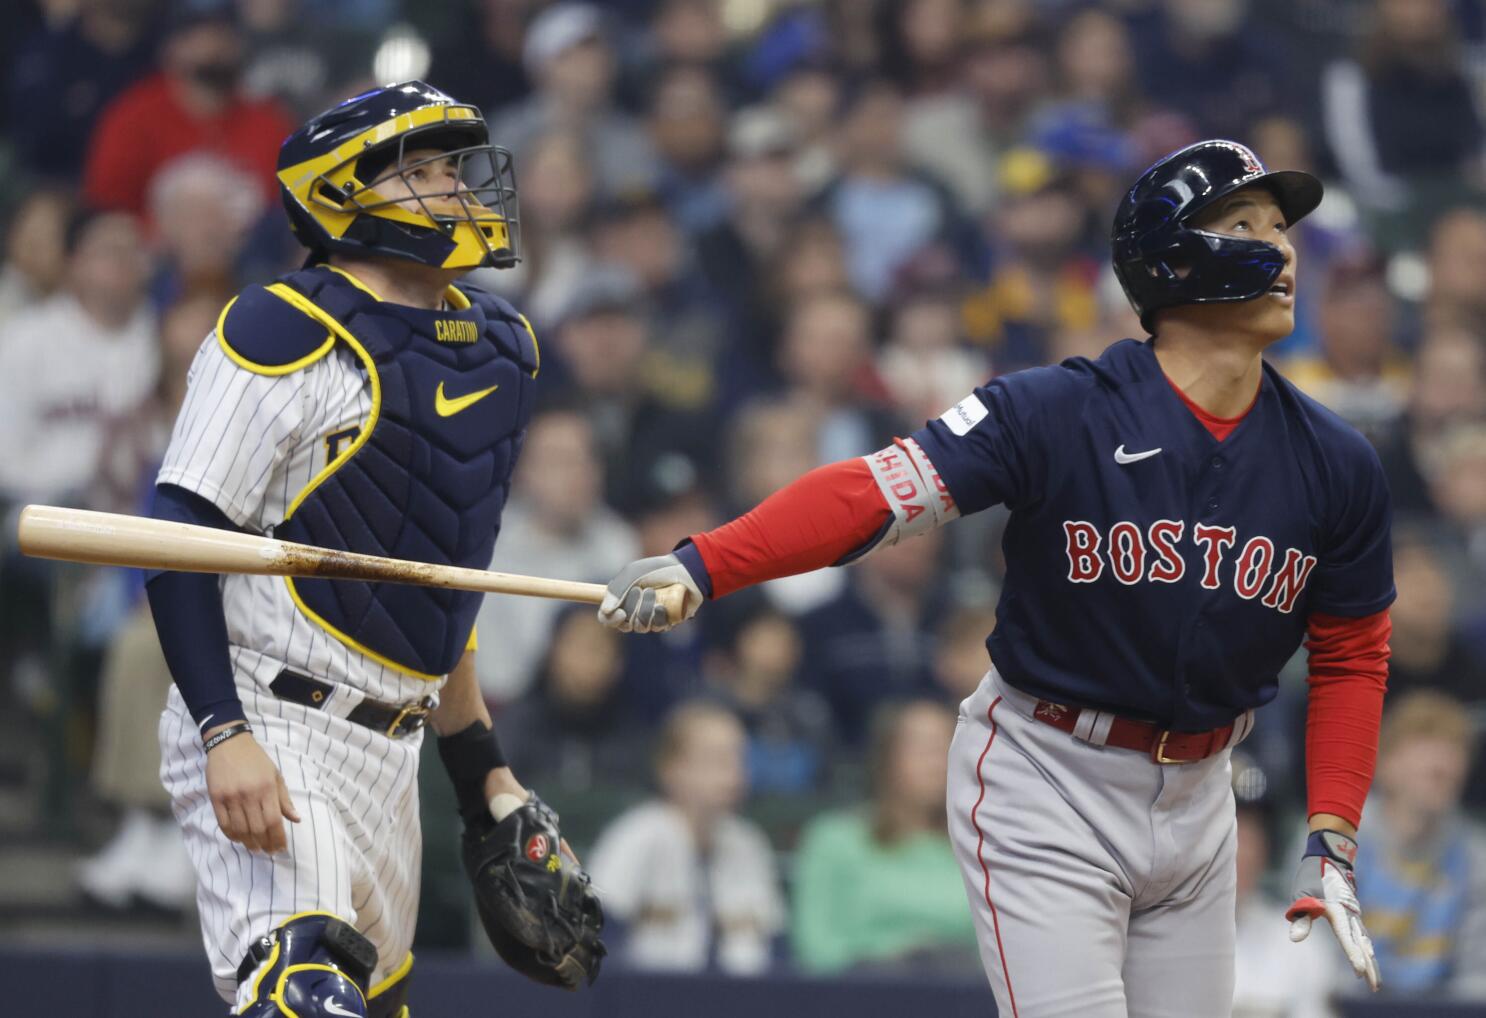 Red Sox snap Brewers' 4-game win streak with 5-3 victory